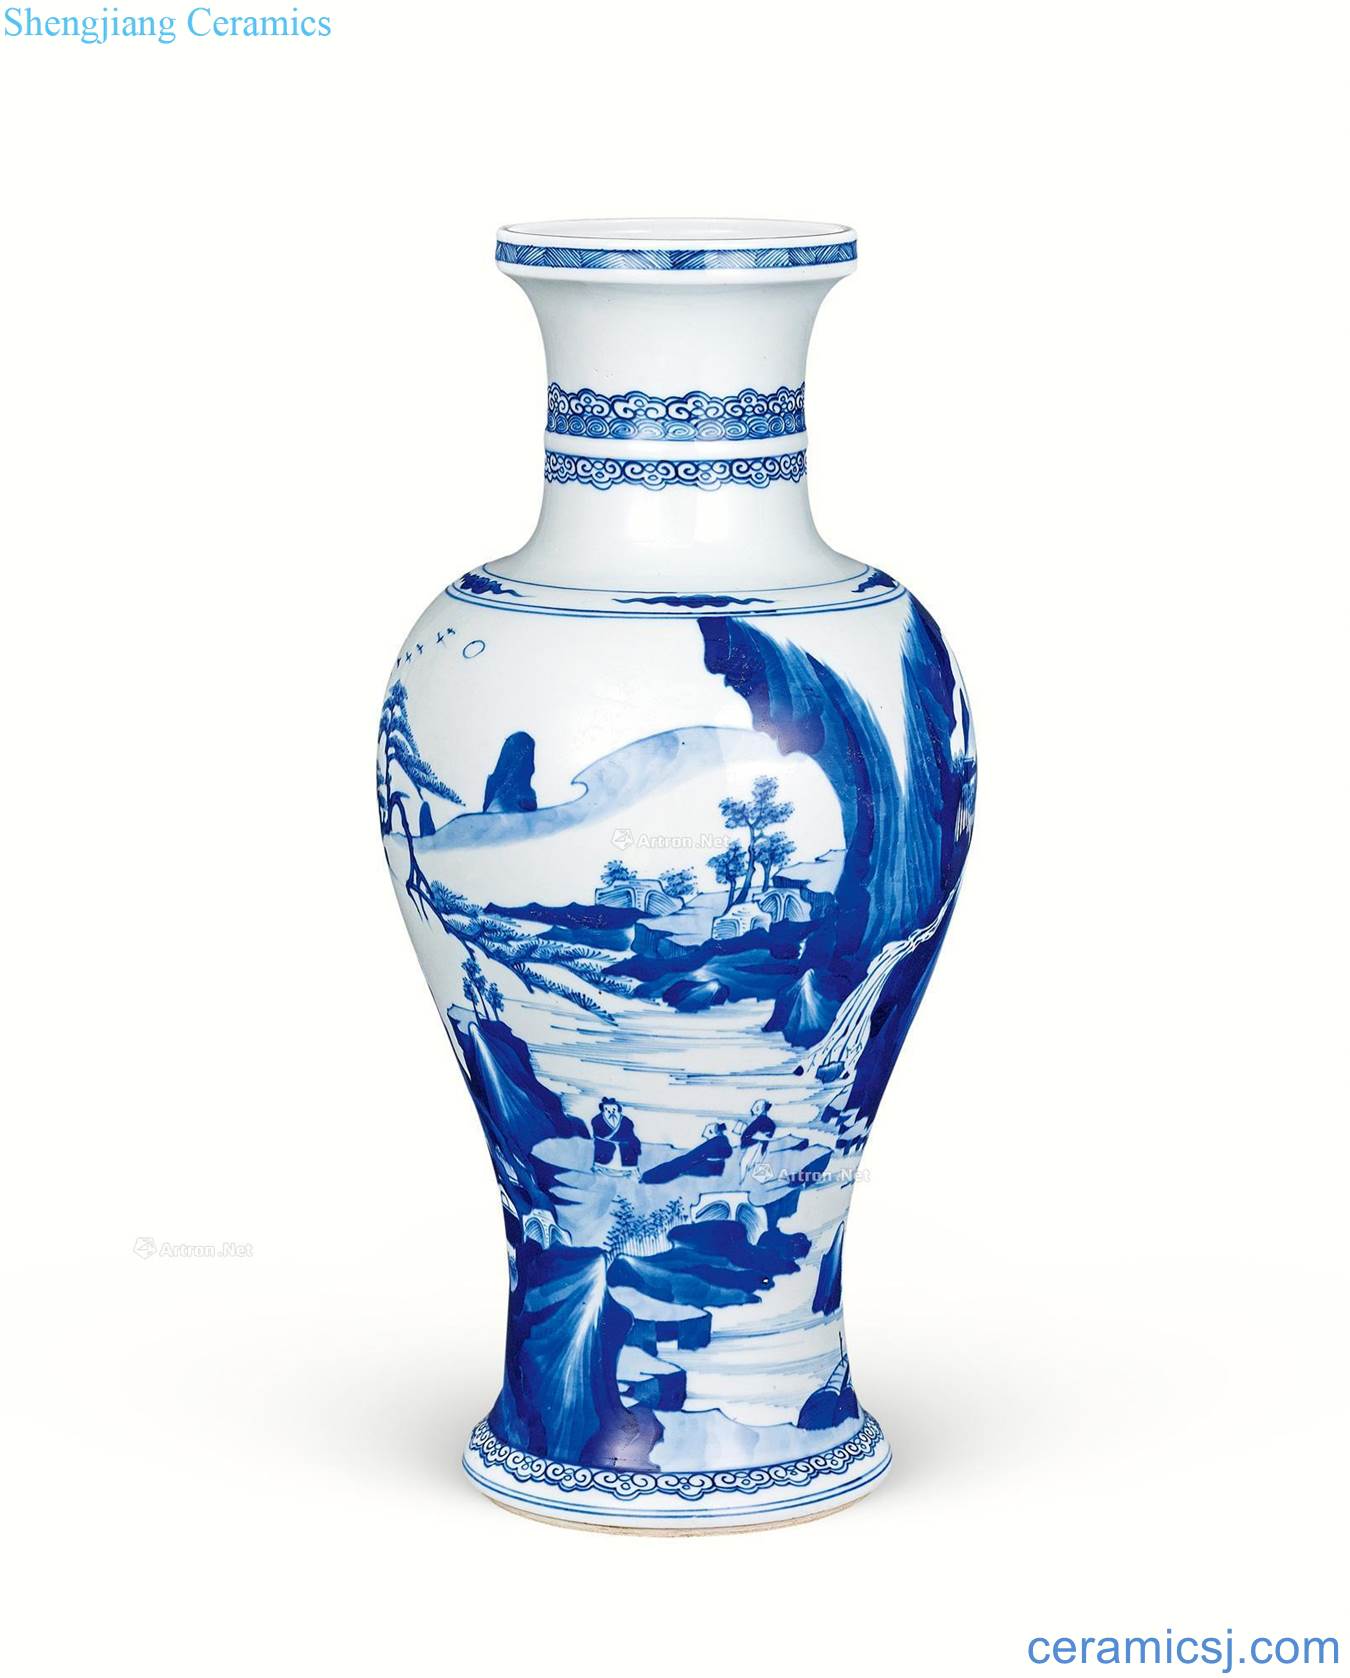 In the qing dynasty Blue and white landscape character